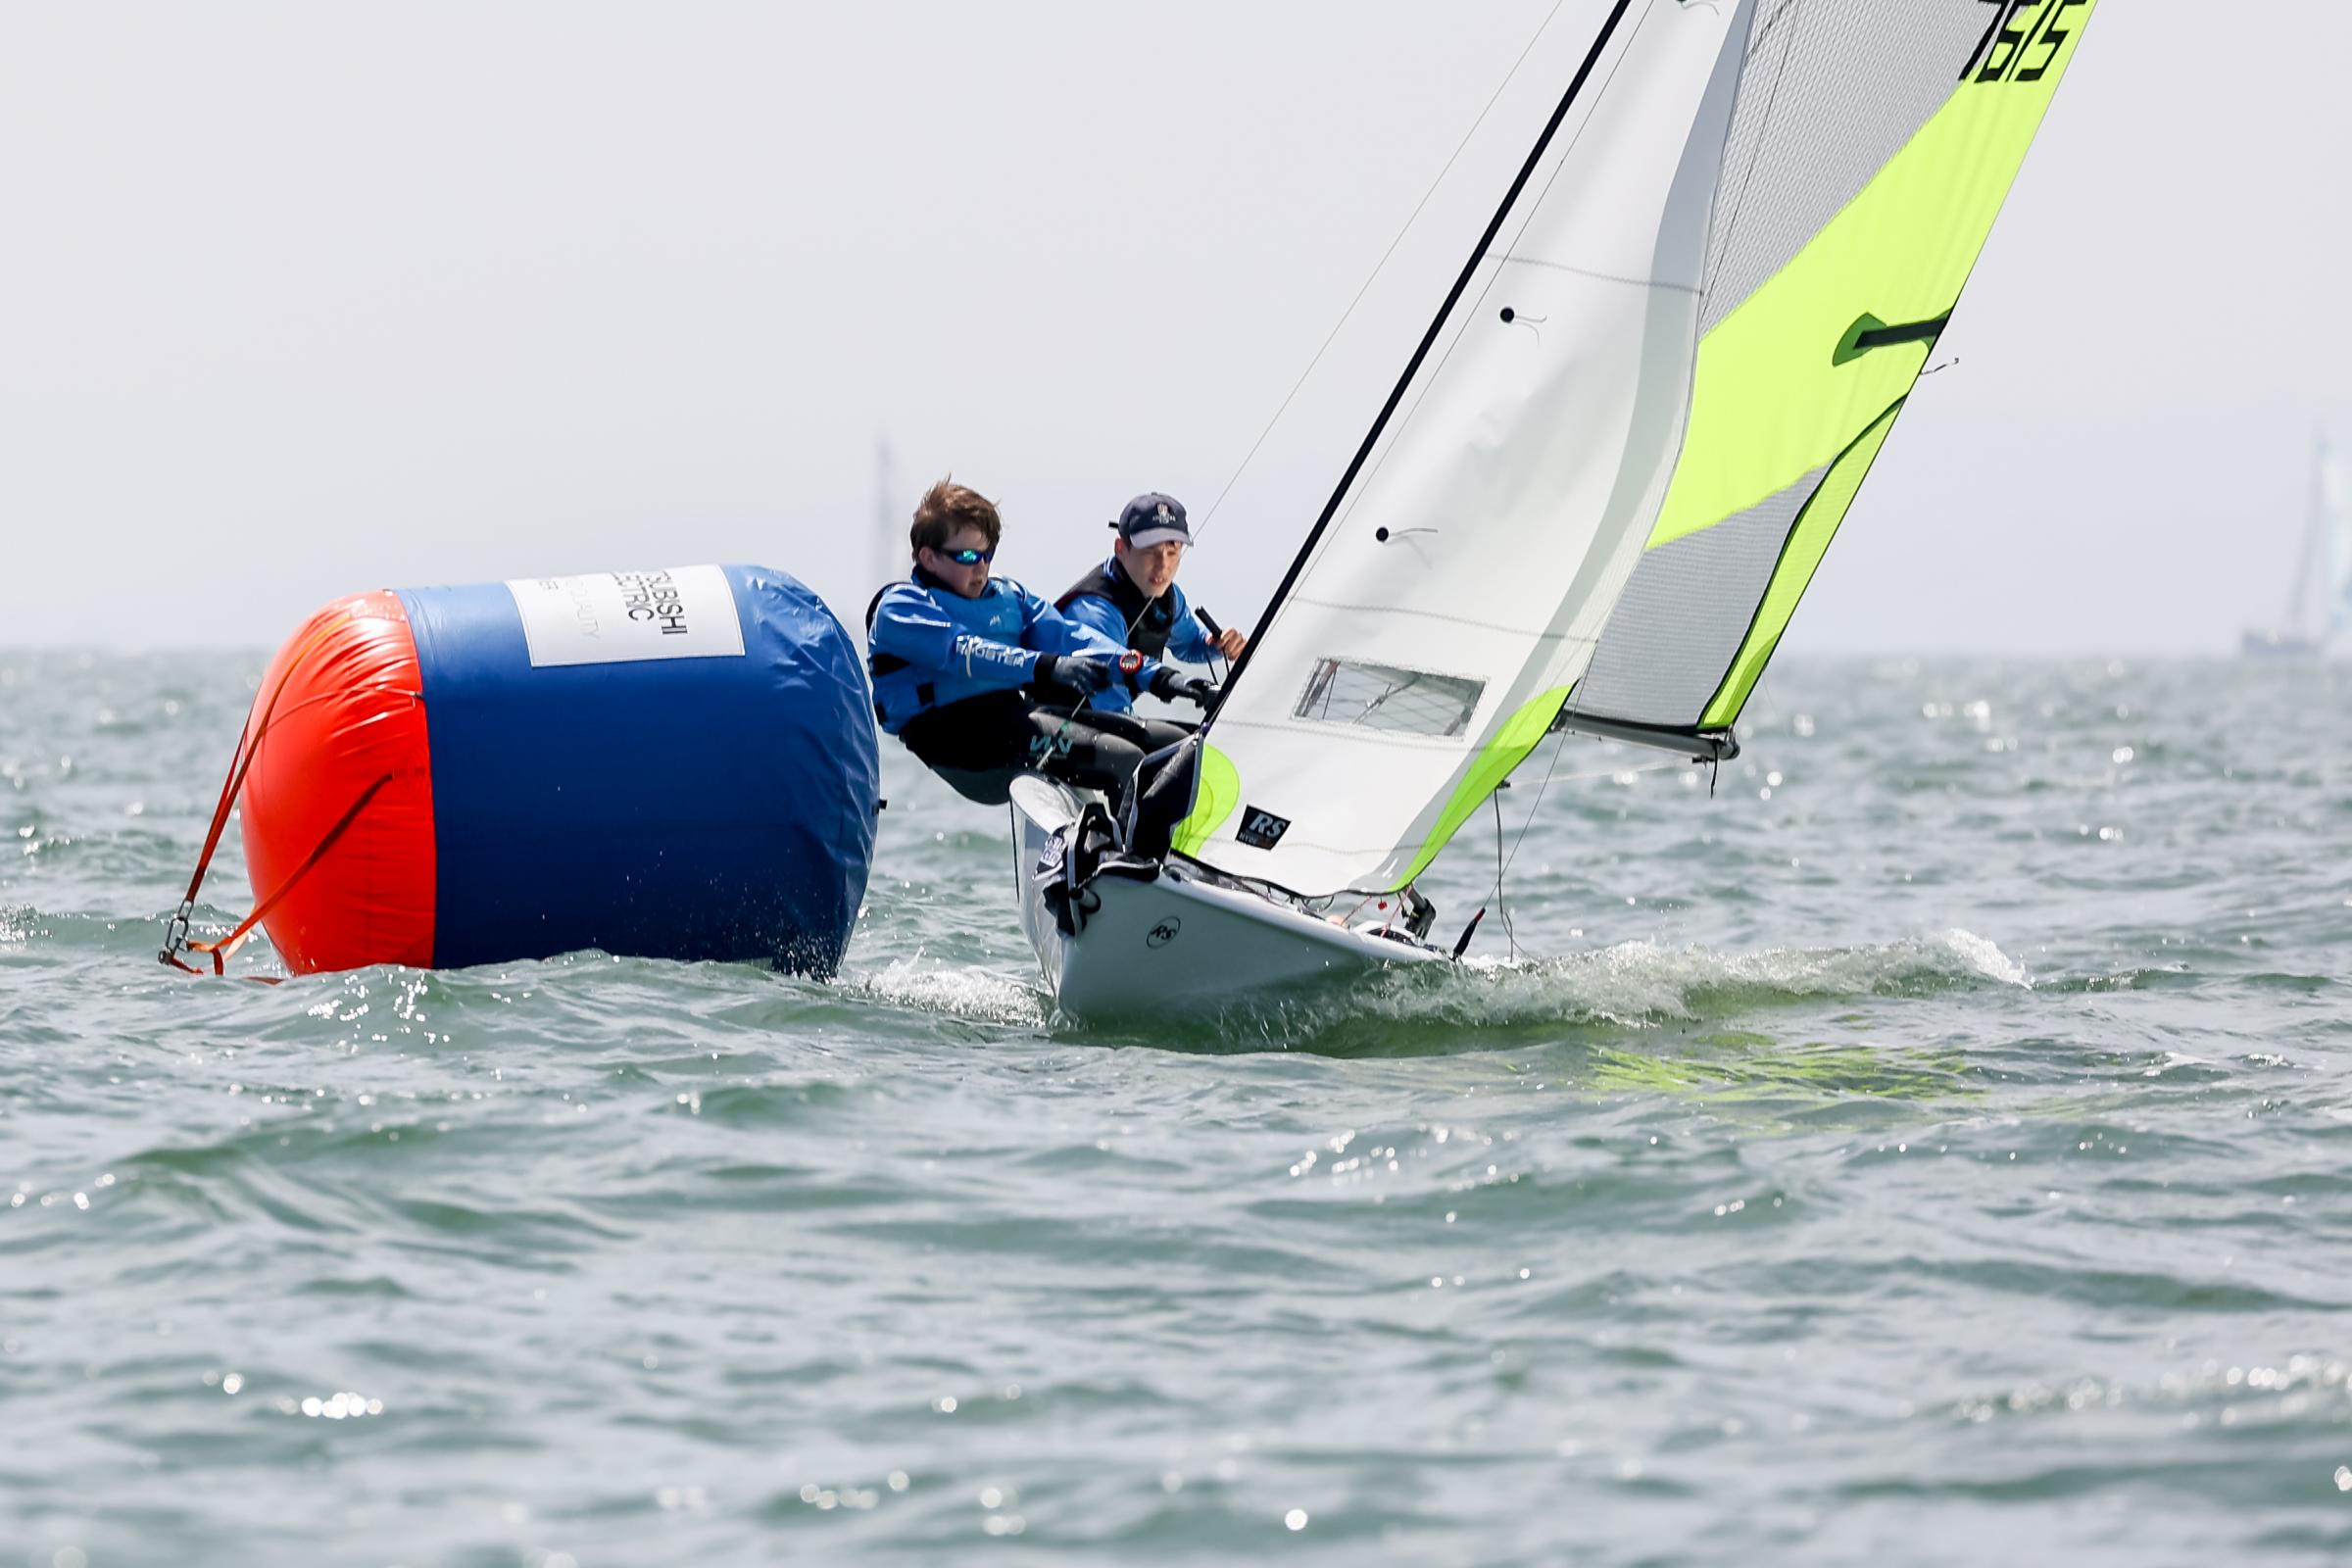 Liam and Felix competed against some of the UKs brightest sailors at this years RS Feva National Championship.